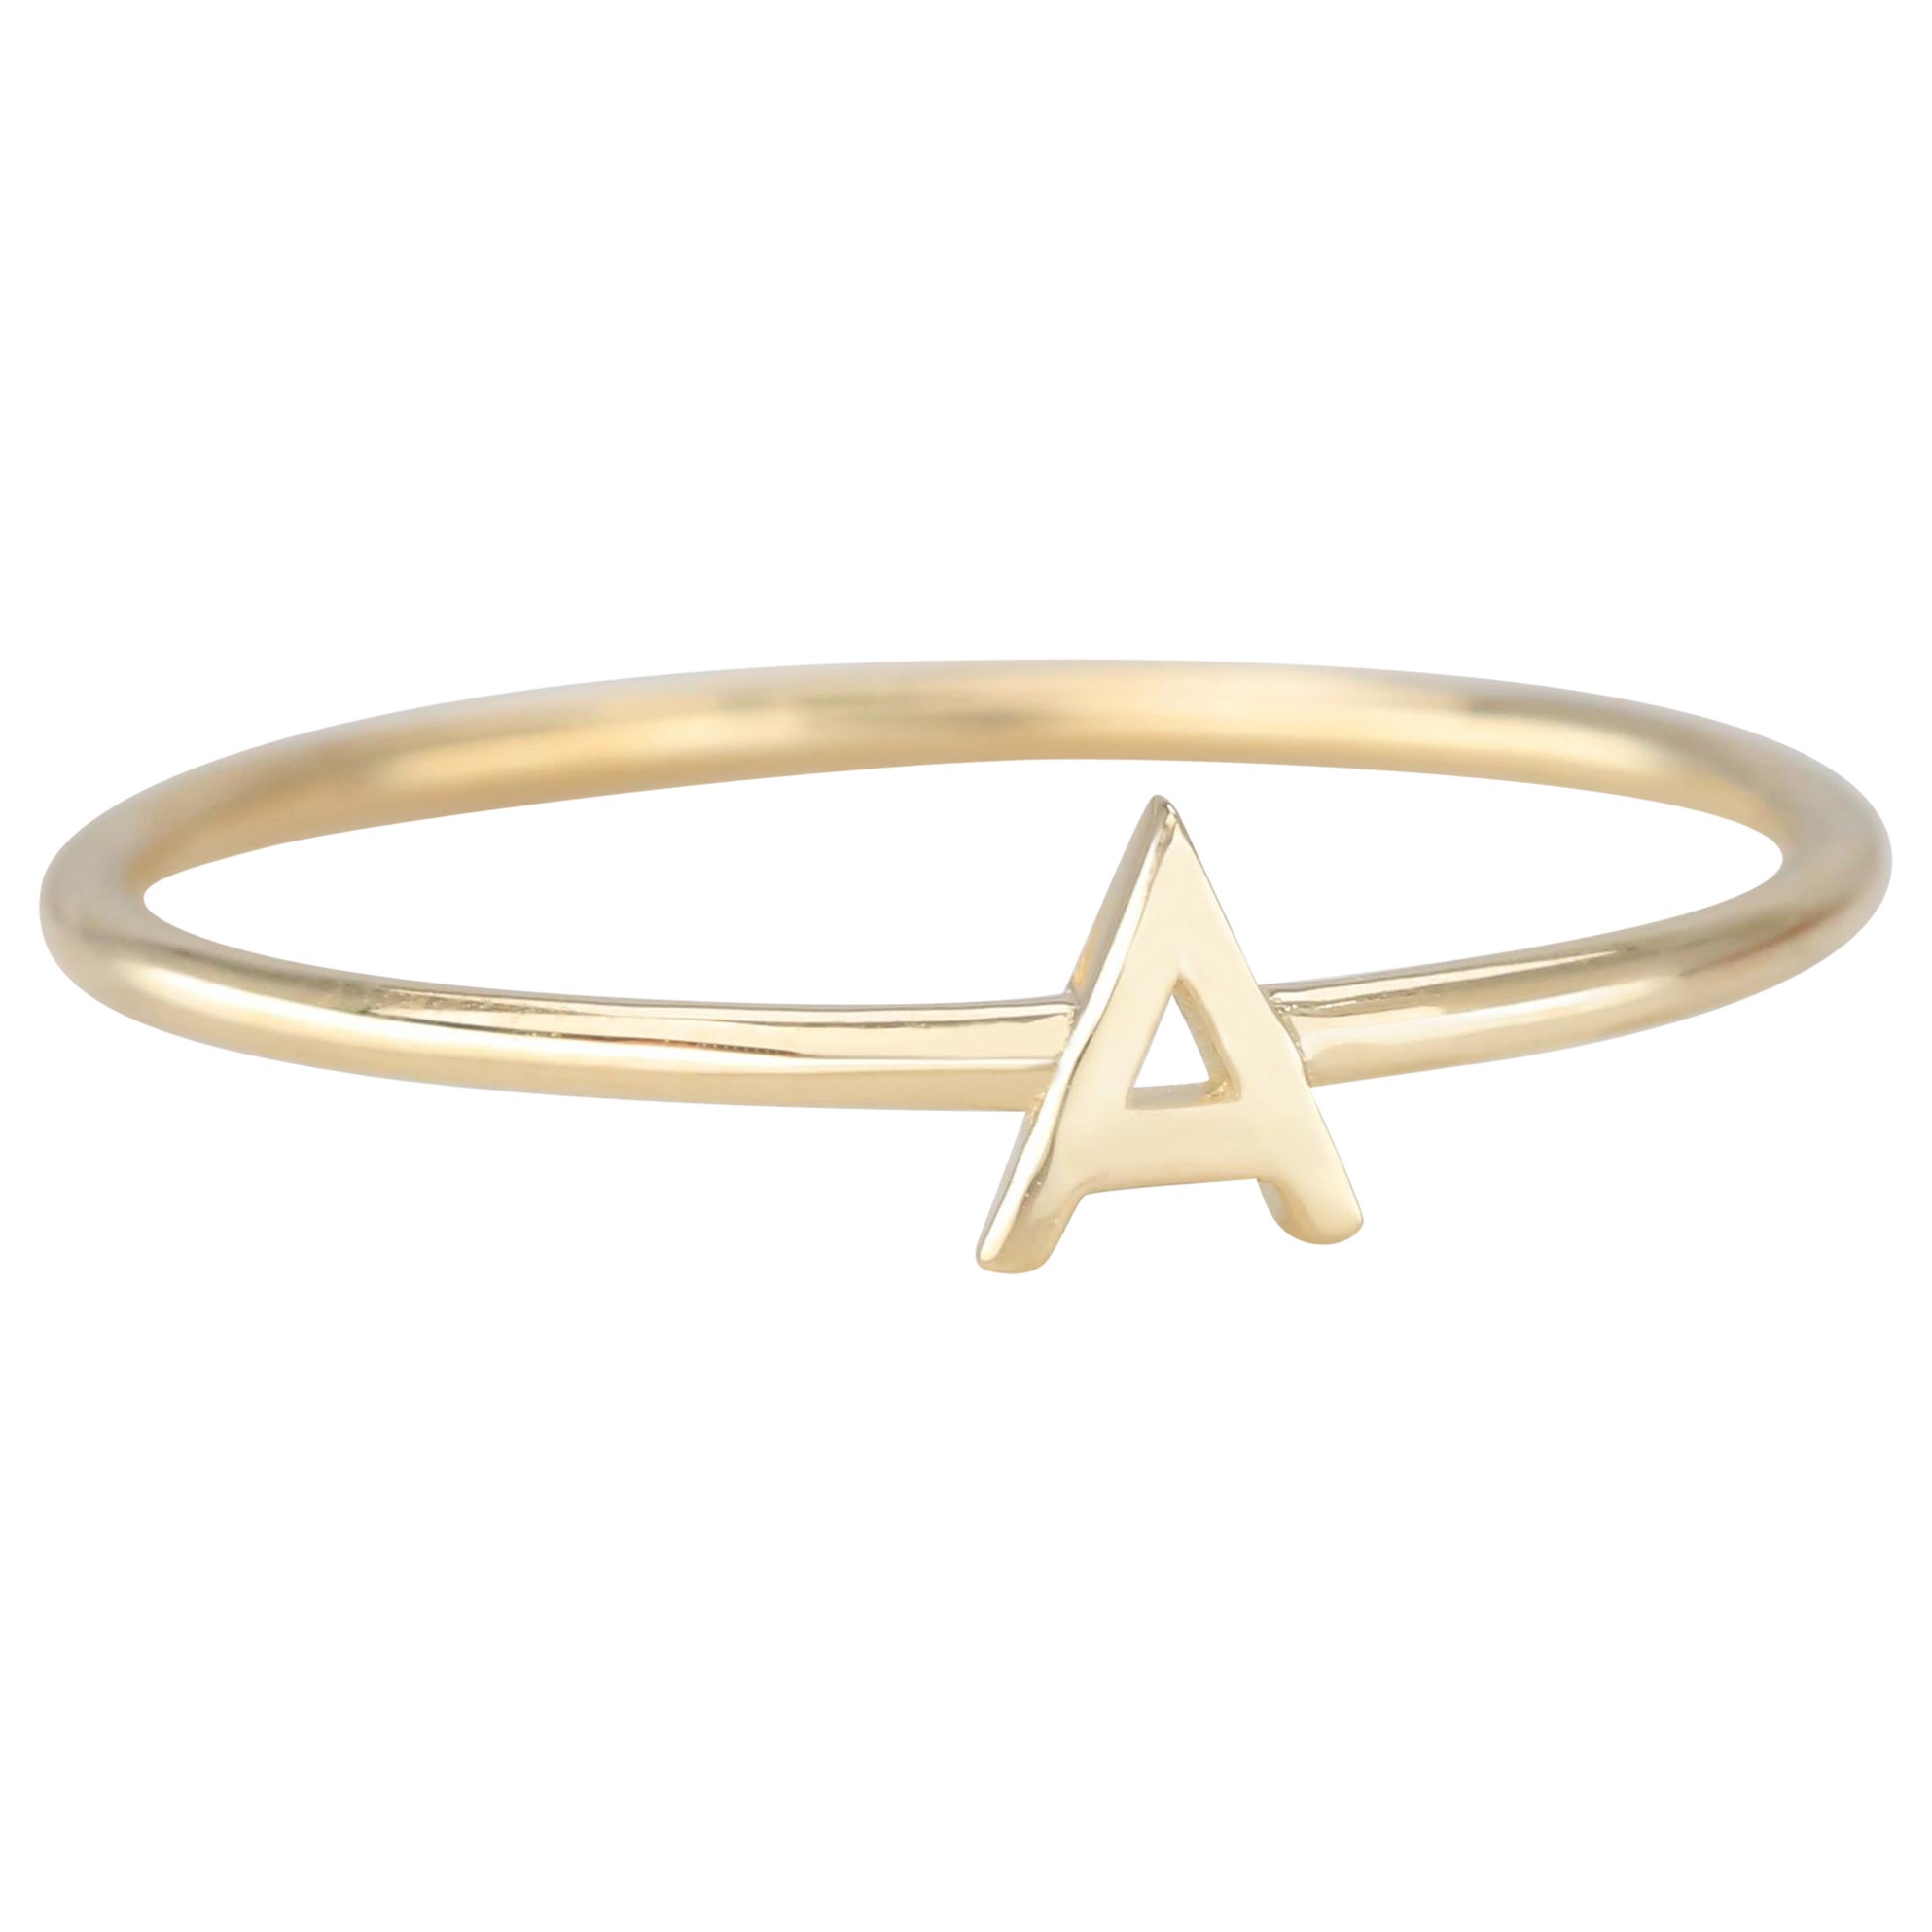 For Sale:  14K Gold Initial A Letter Ring, Personalized Initial Letter Ring